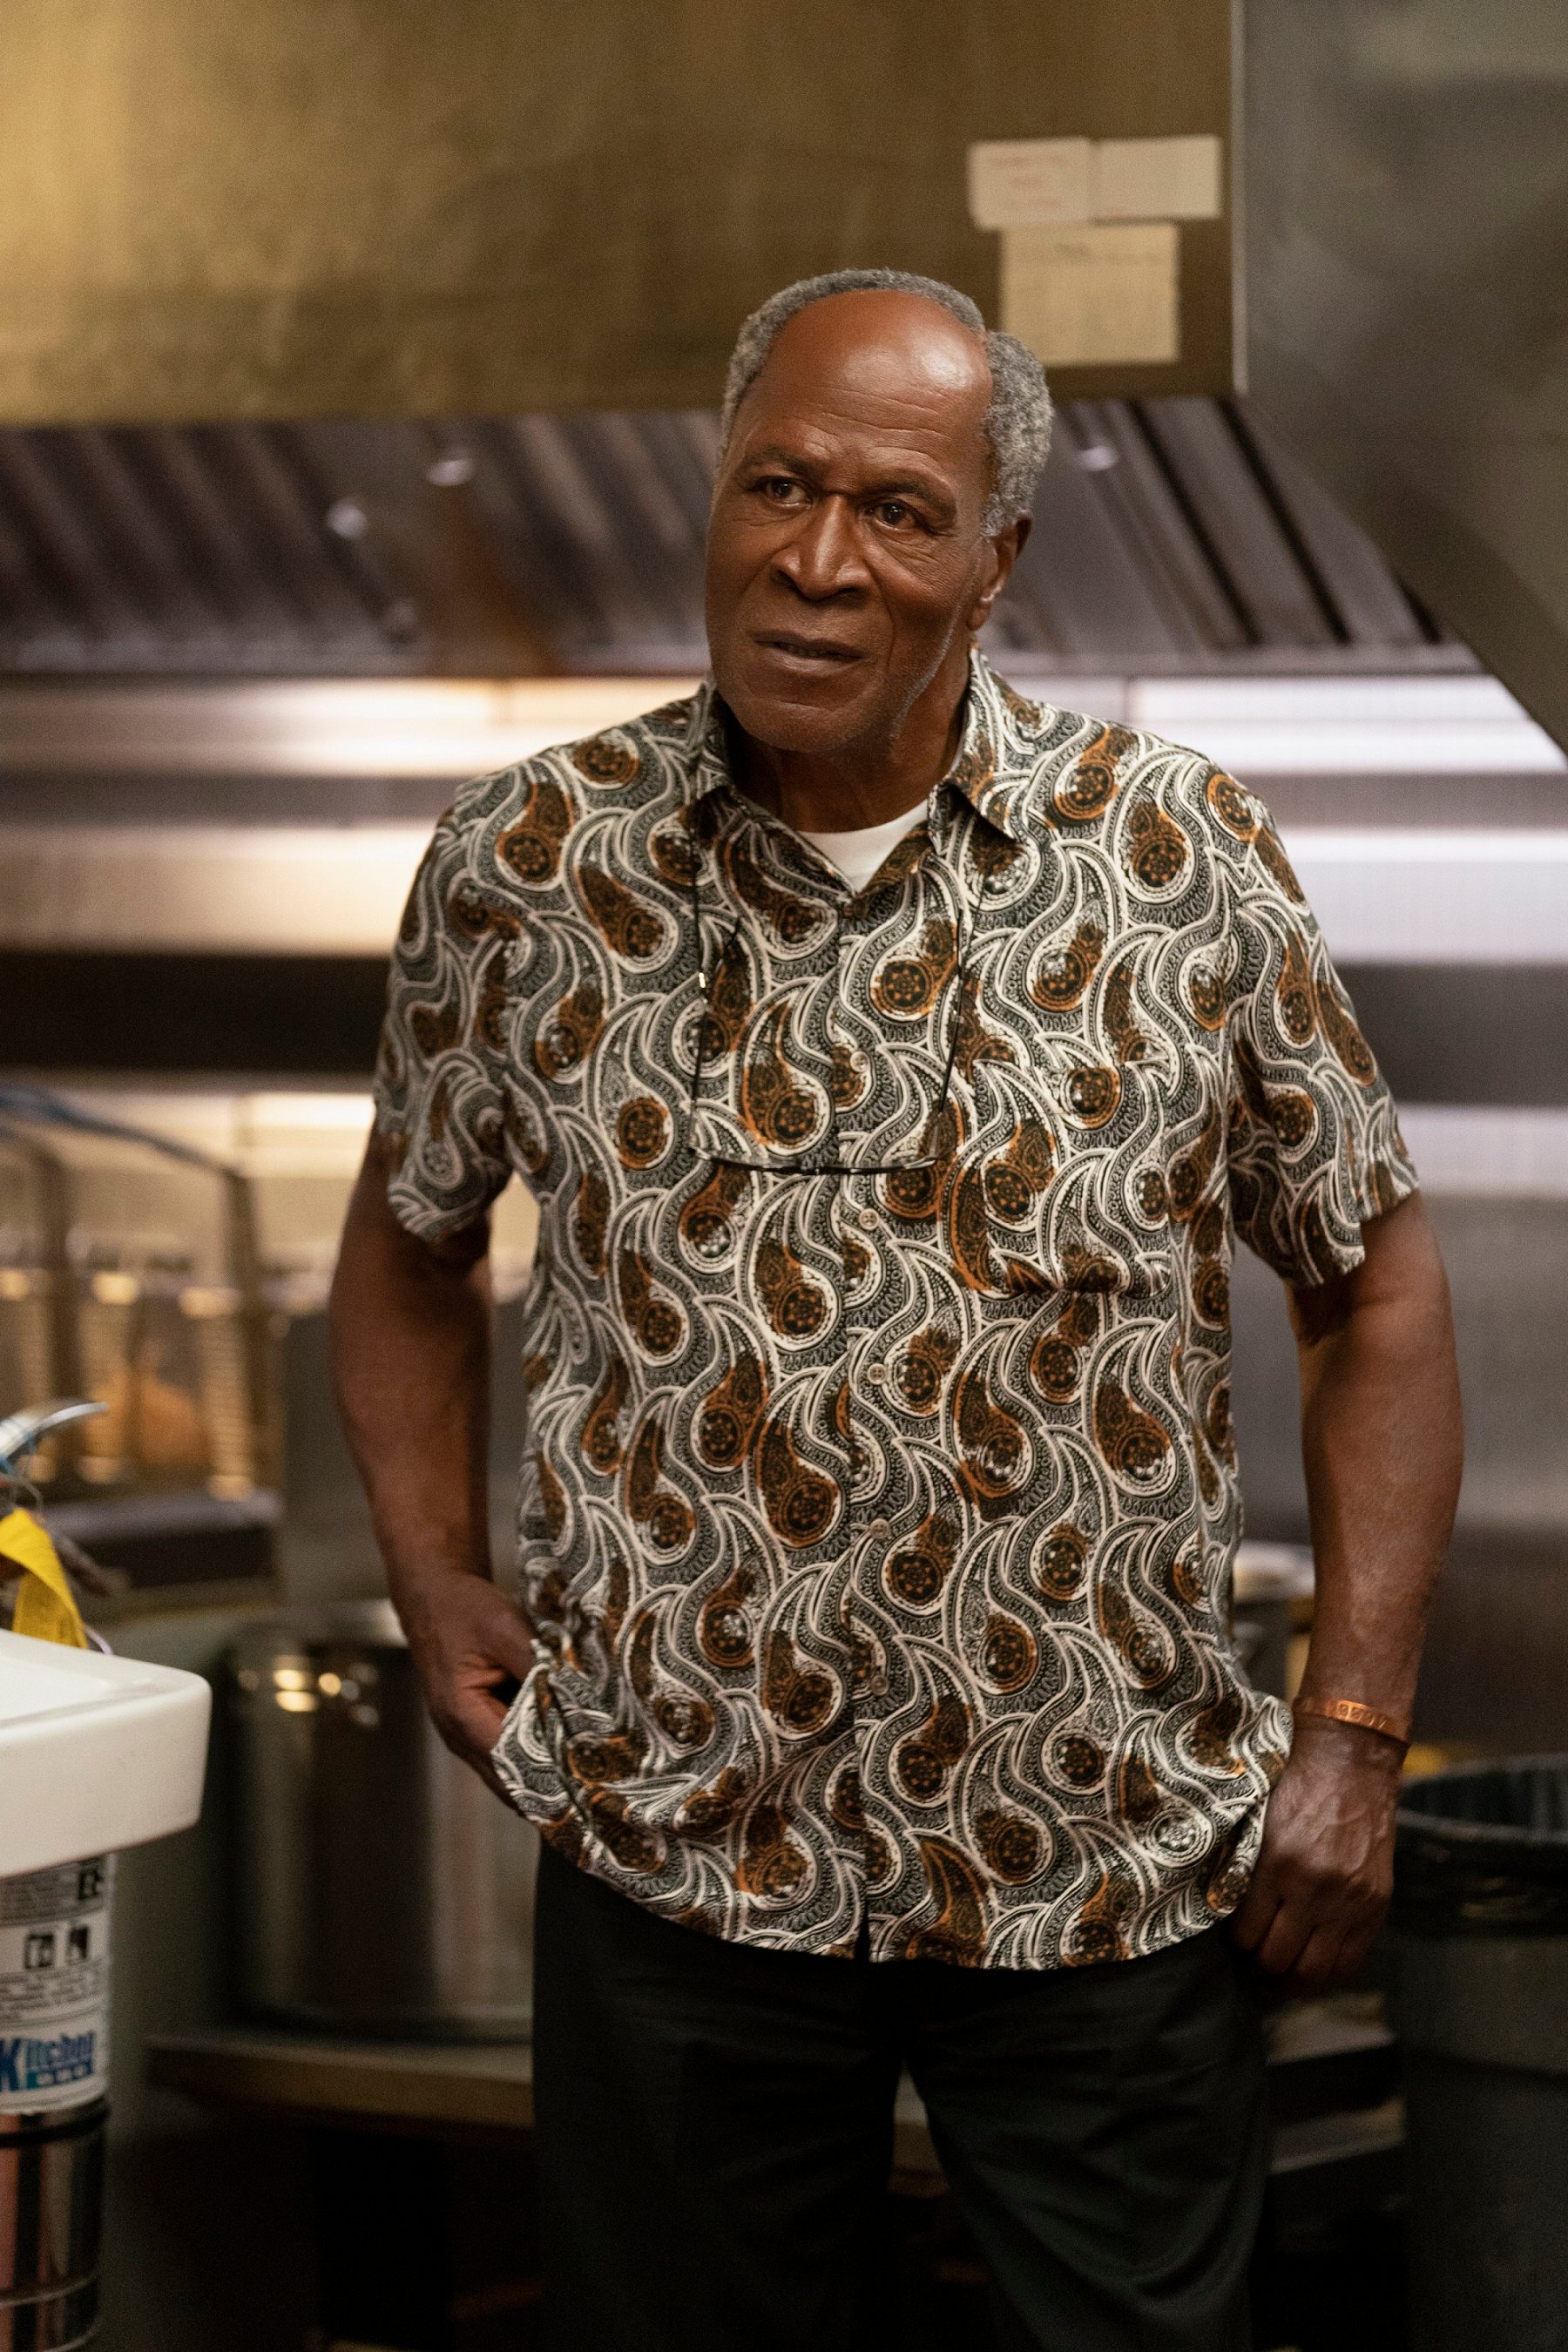 Coming 2 America star John Amos in the McDowell's kitchen